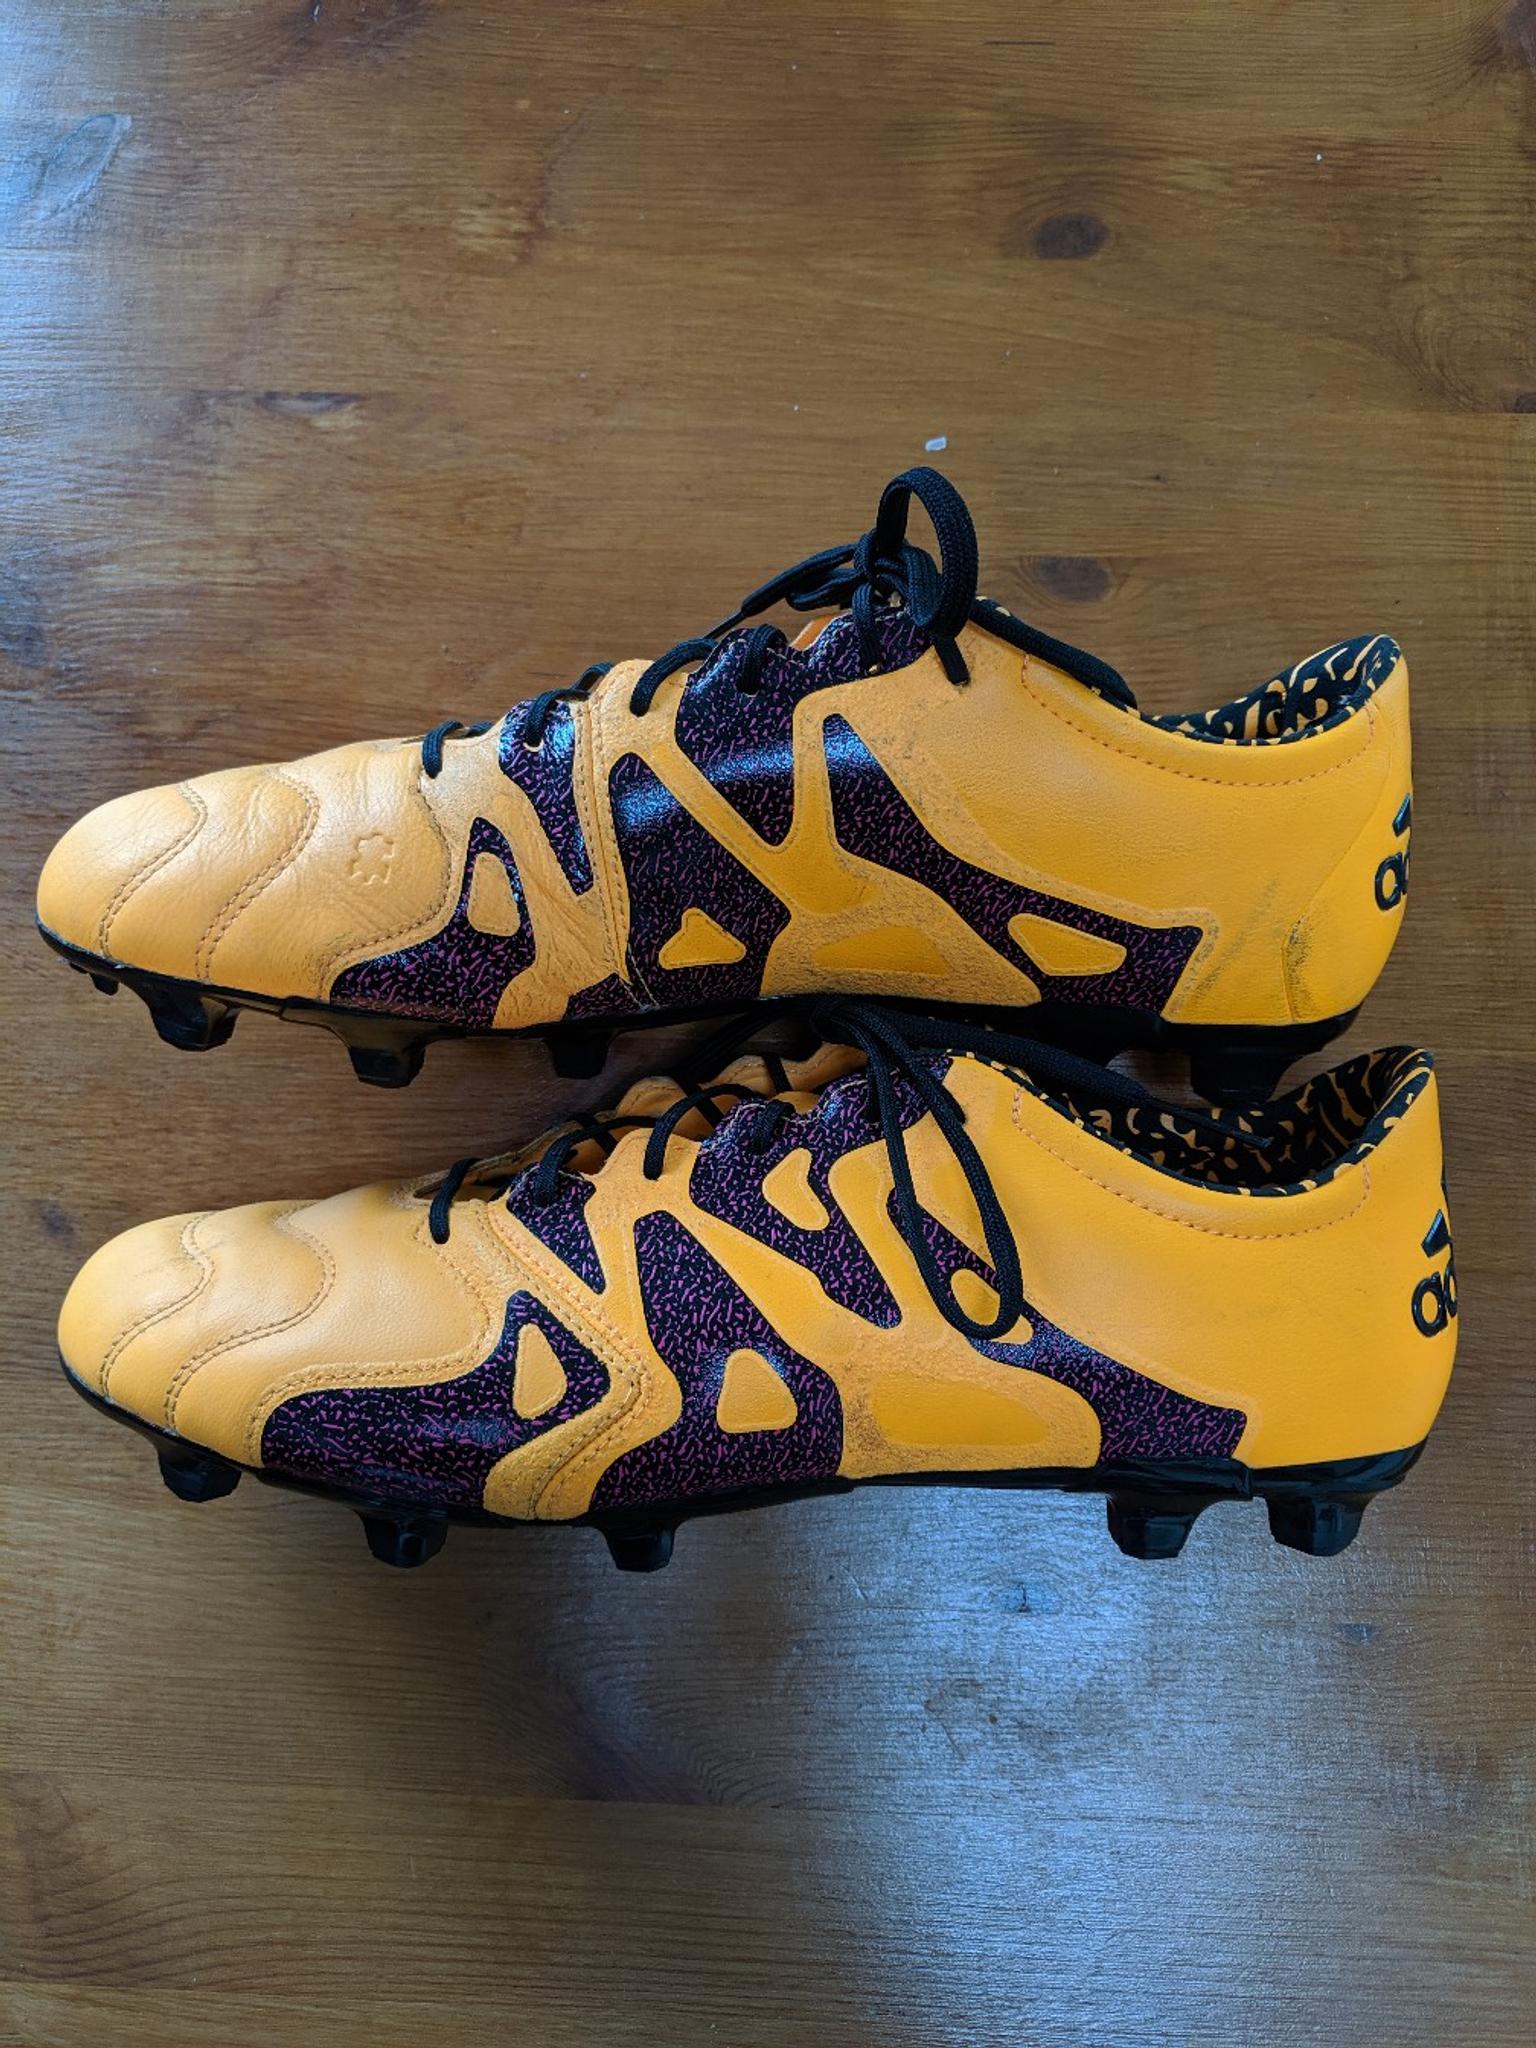 Adidas X 15.2 Leather Boots - size 10 